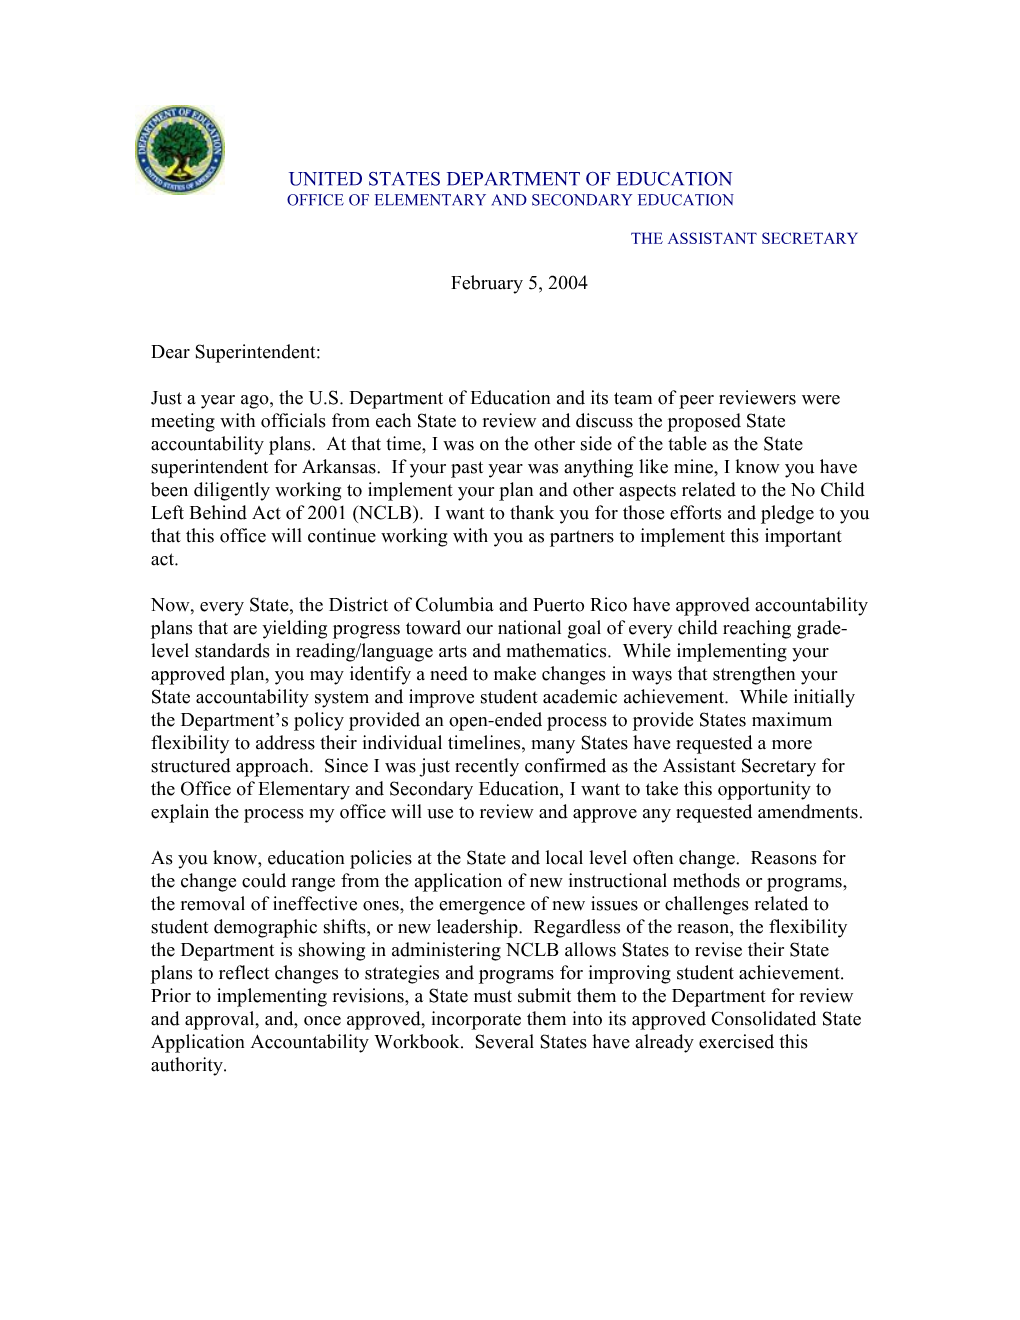 Letter to Superintendents Regarding Amendment Process for State Accountability Plans (MS WORD)